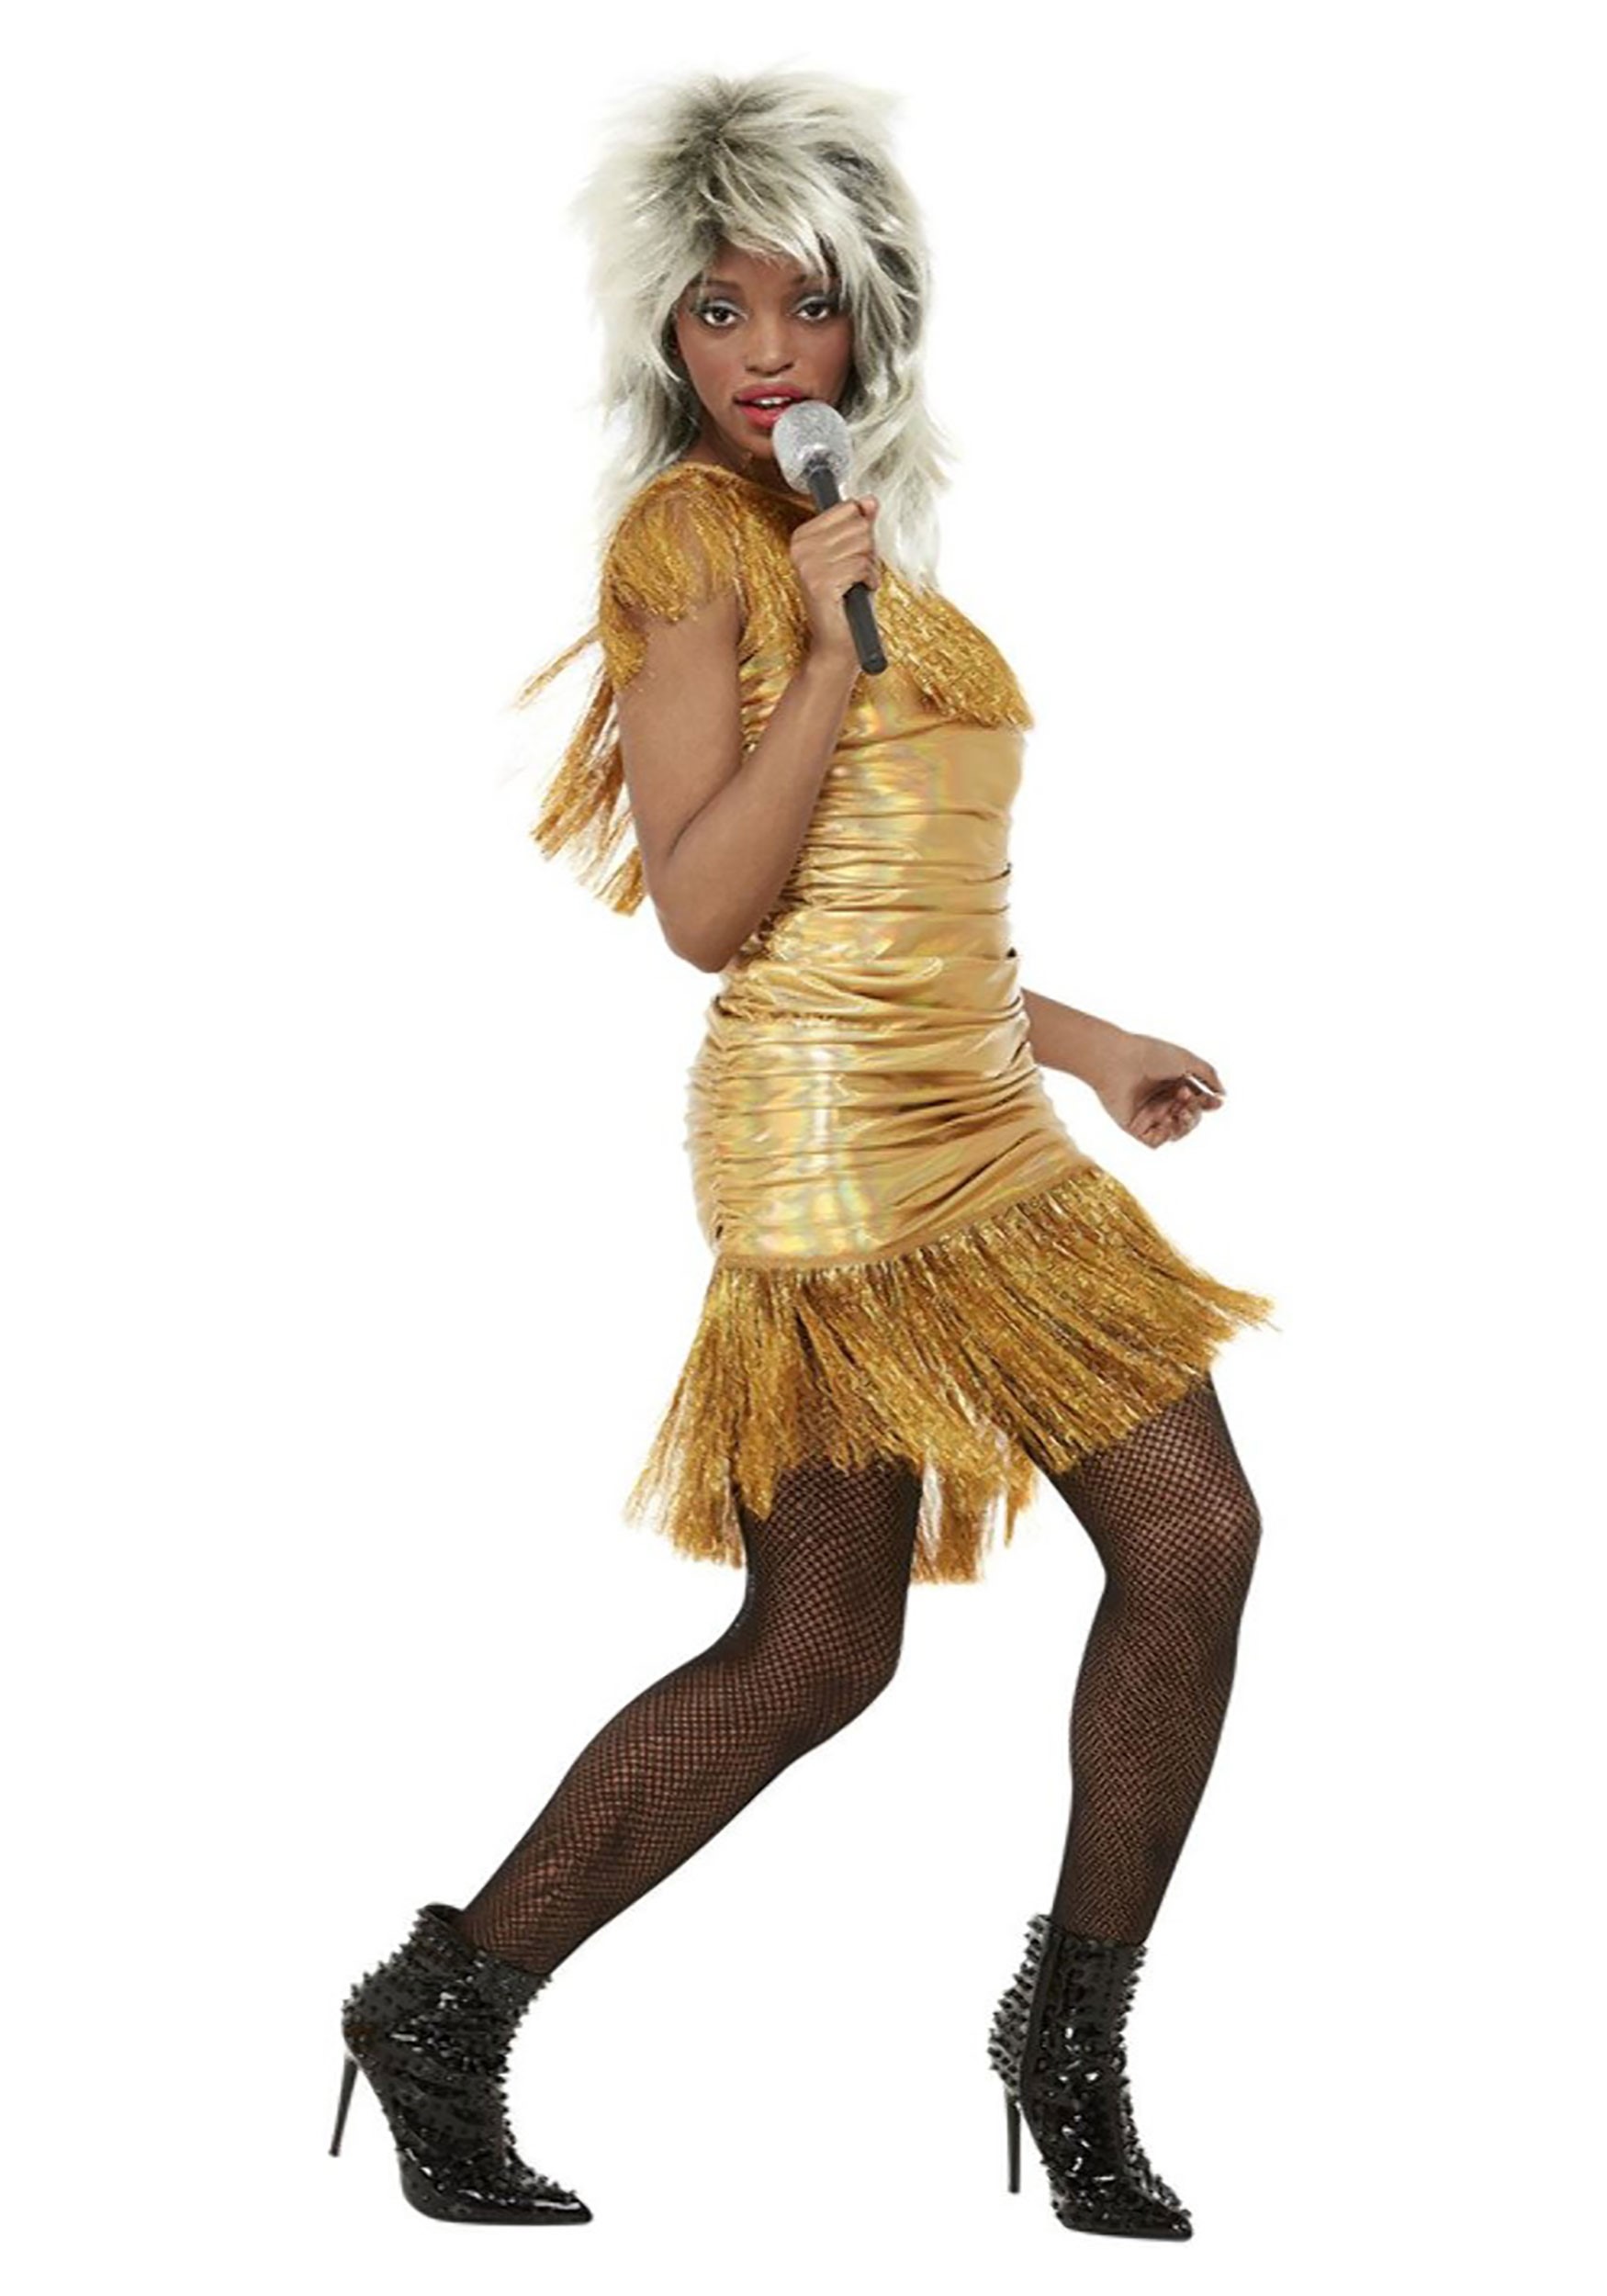 Shop Women's 1980s Costumes, Tina Turner Outfits